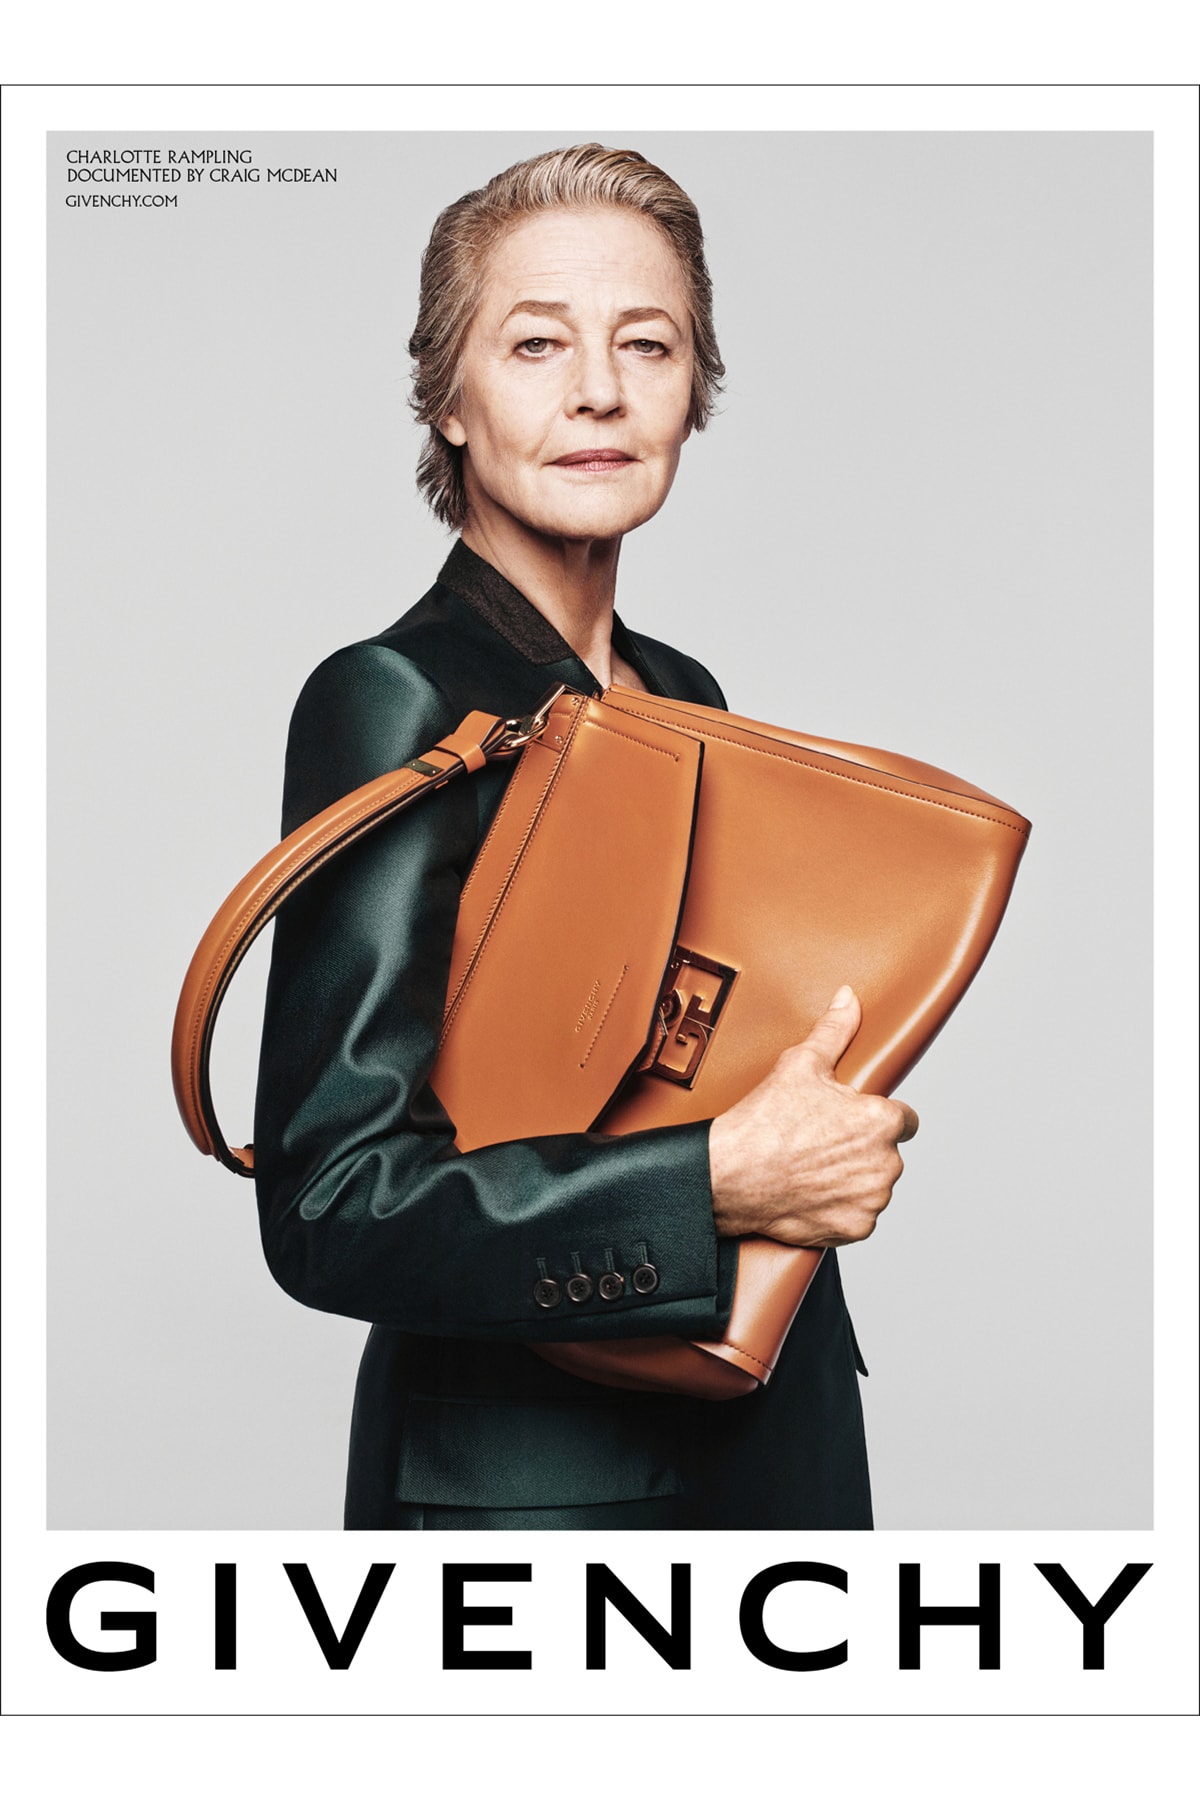 charlotte rampling marc jacobs givenchy SS20 campaign collection instagram new york paris clare waight keller craig mcdean acting